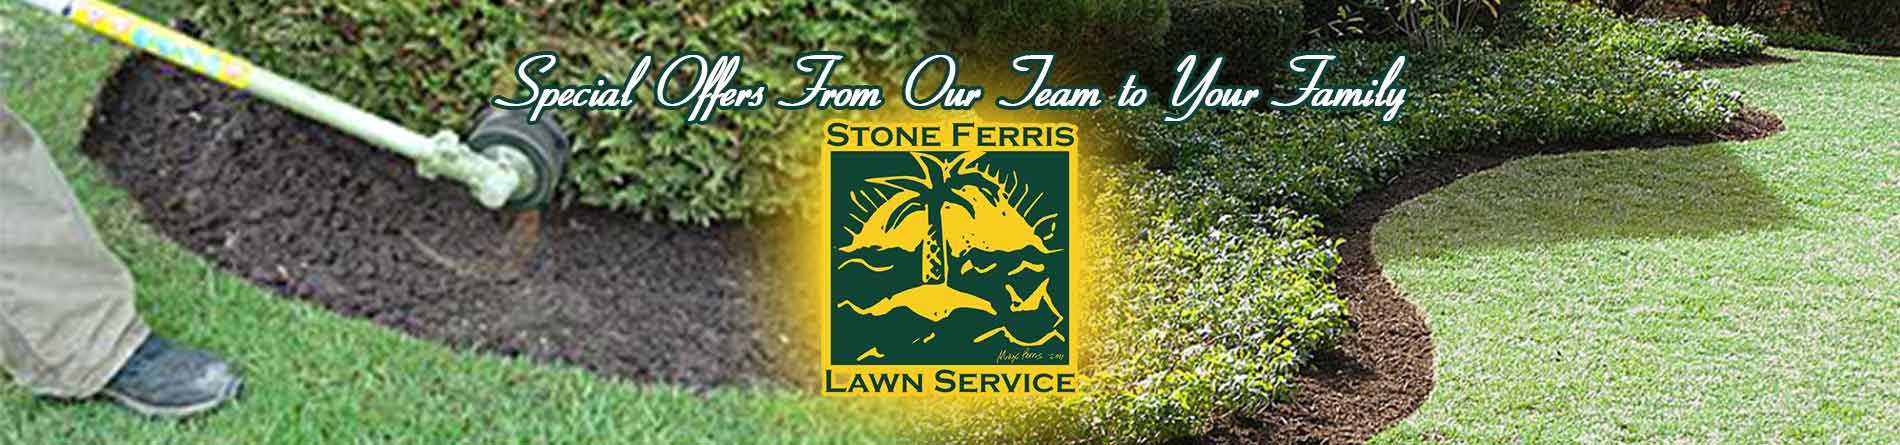 Best Value Lawn Care